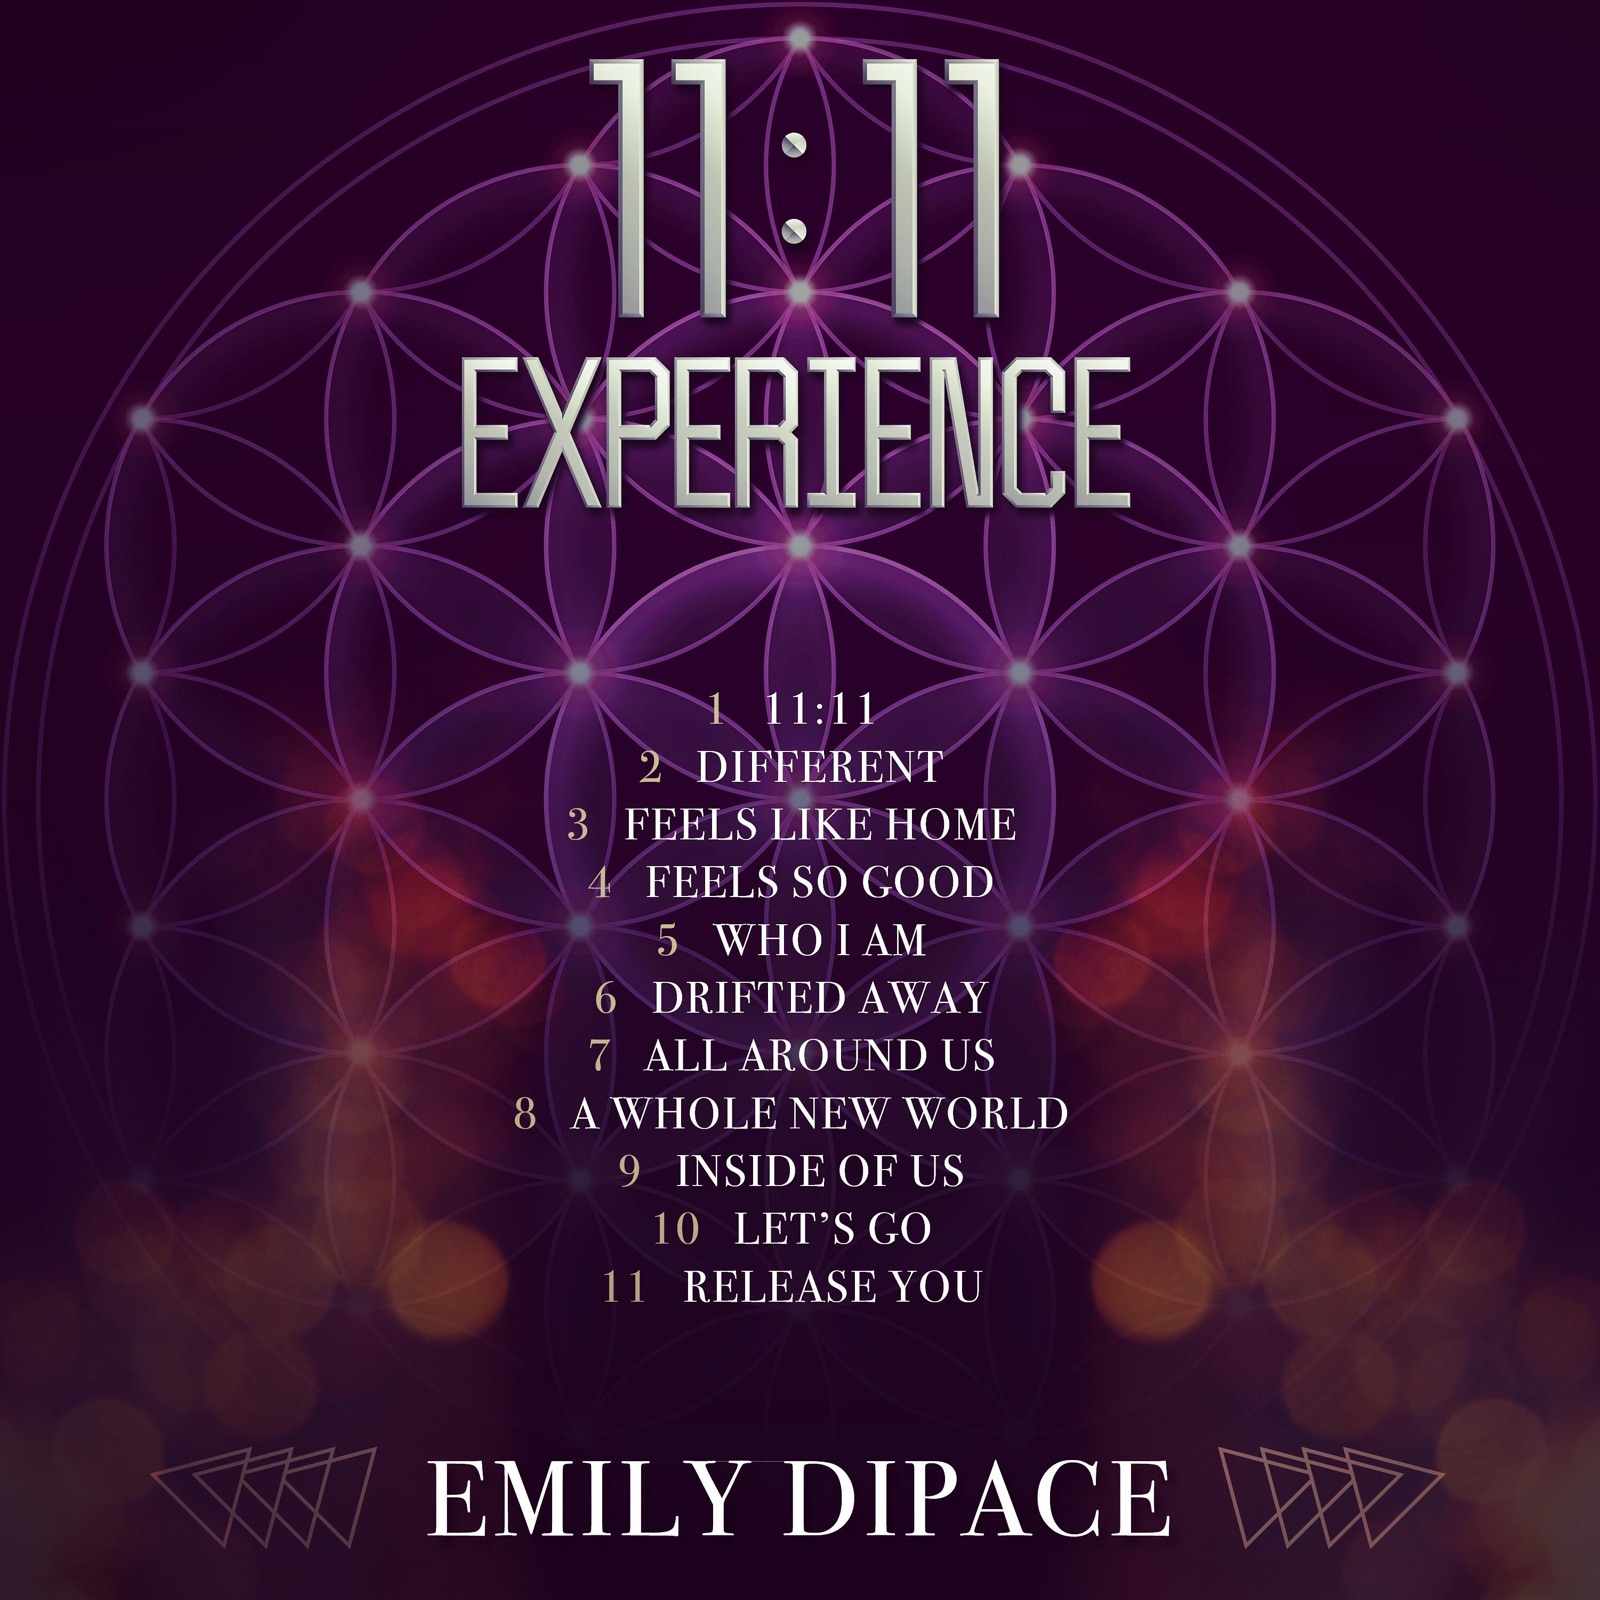 11:11 Experience